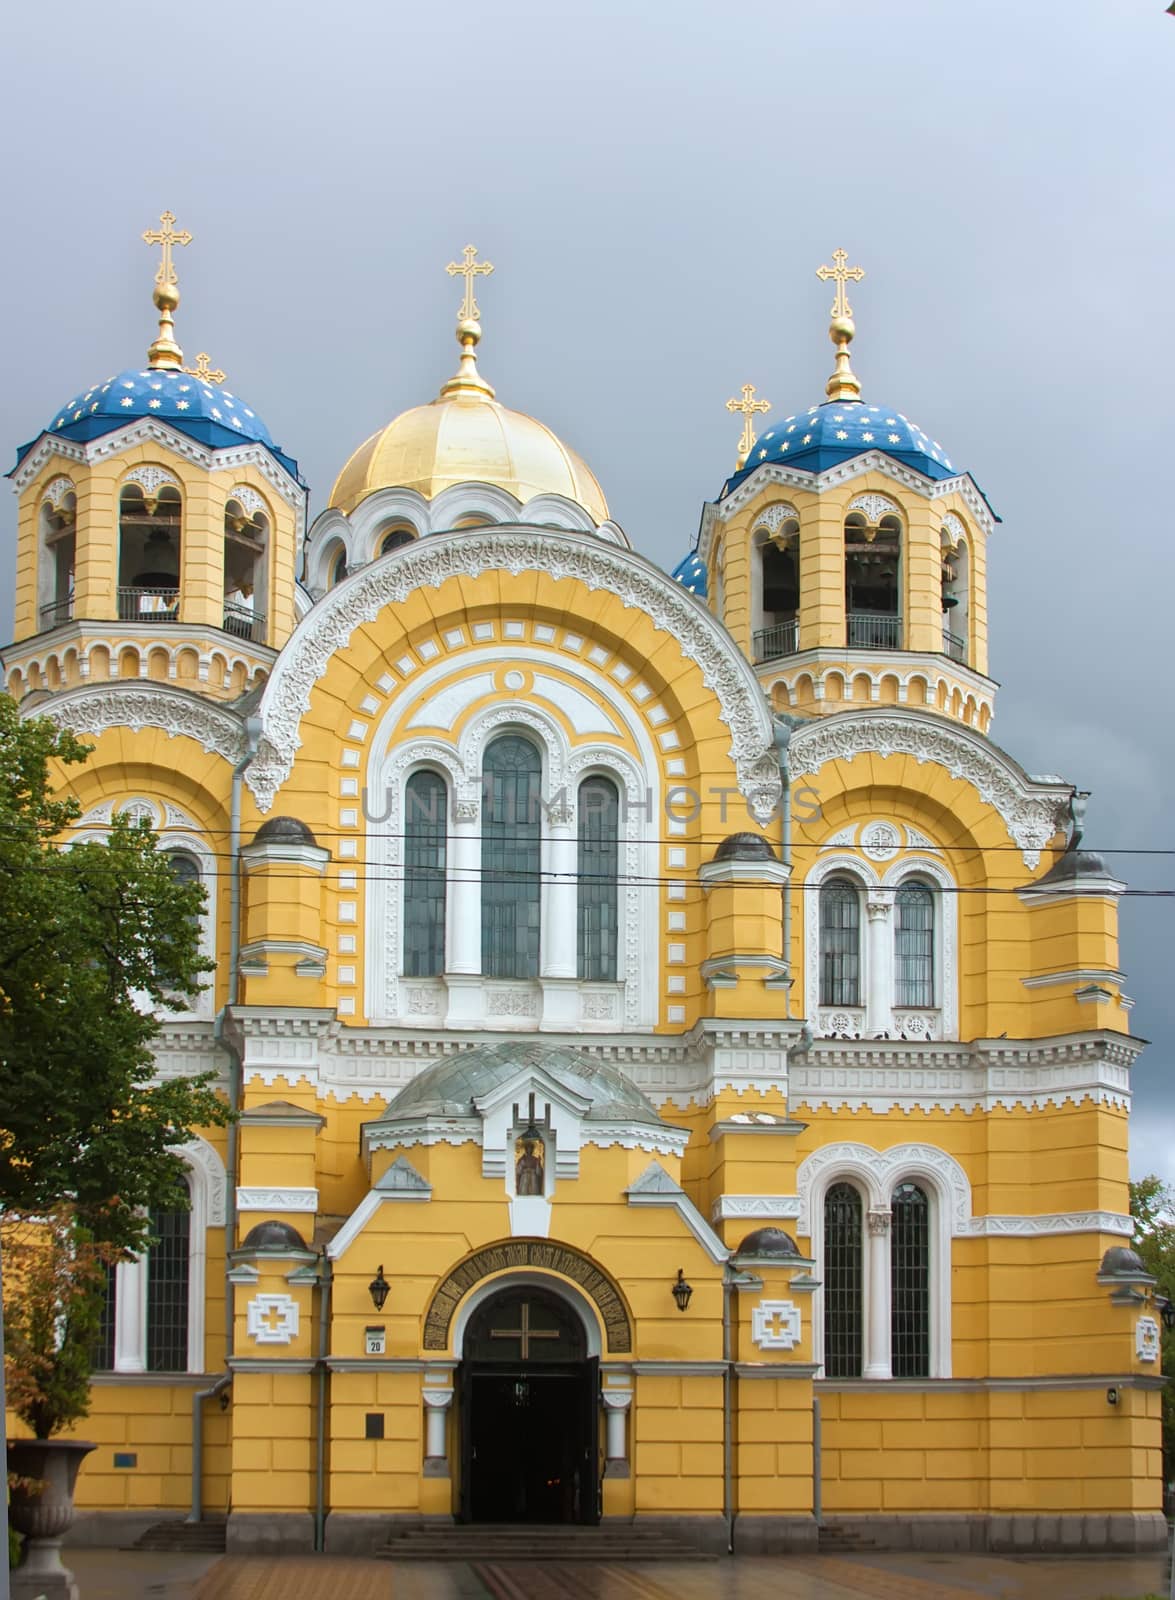 It is one of the city's major landmarks and the main temple of the Ukrainian Orthodox Church